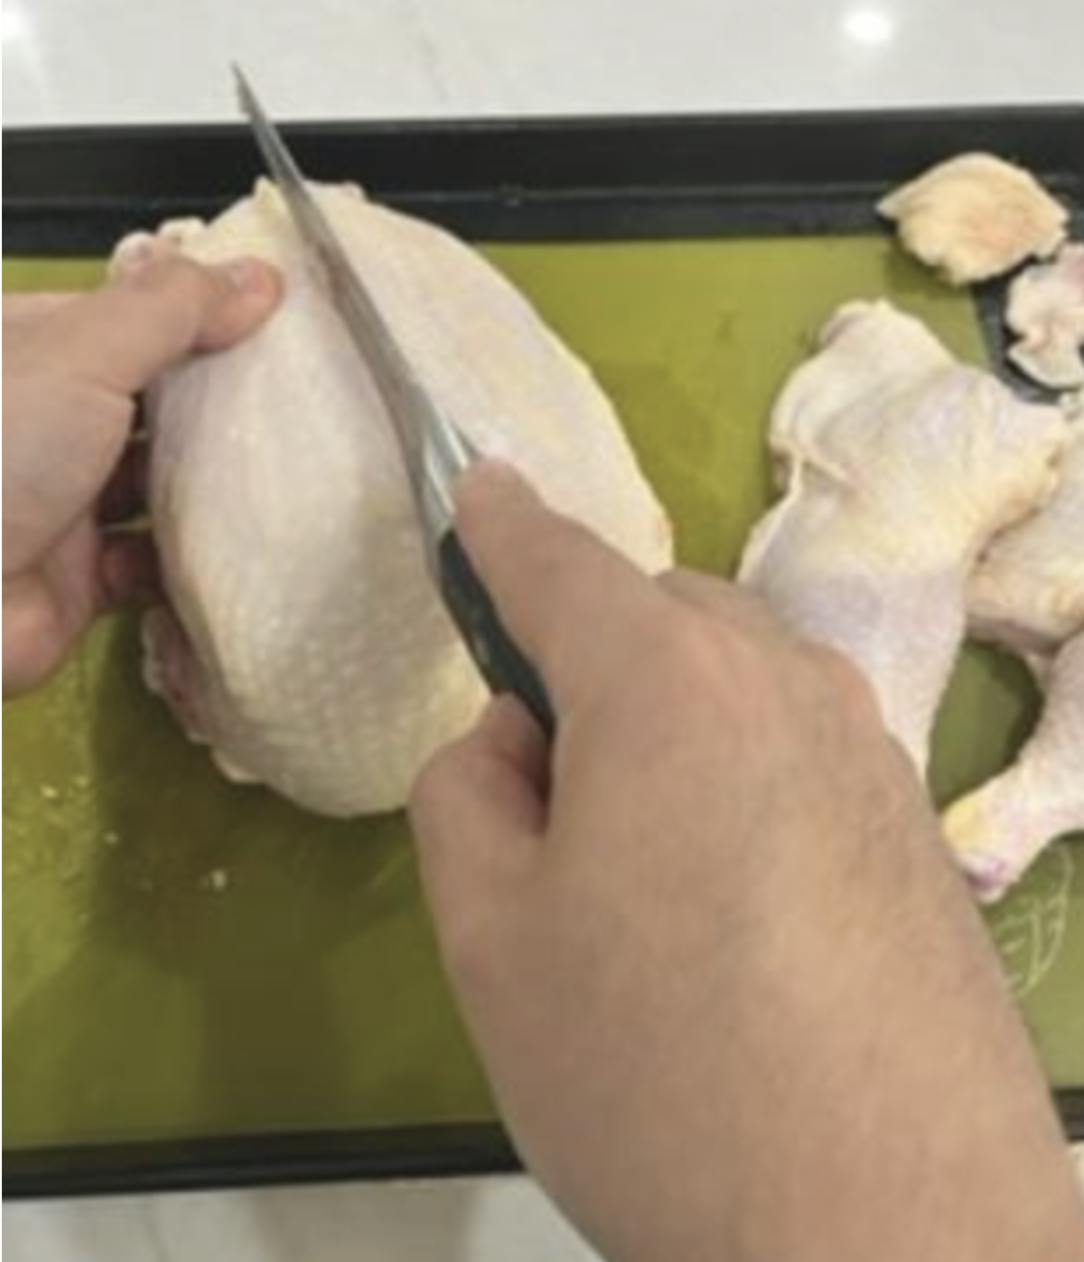 Cutting the breast off a chicken. 